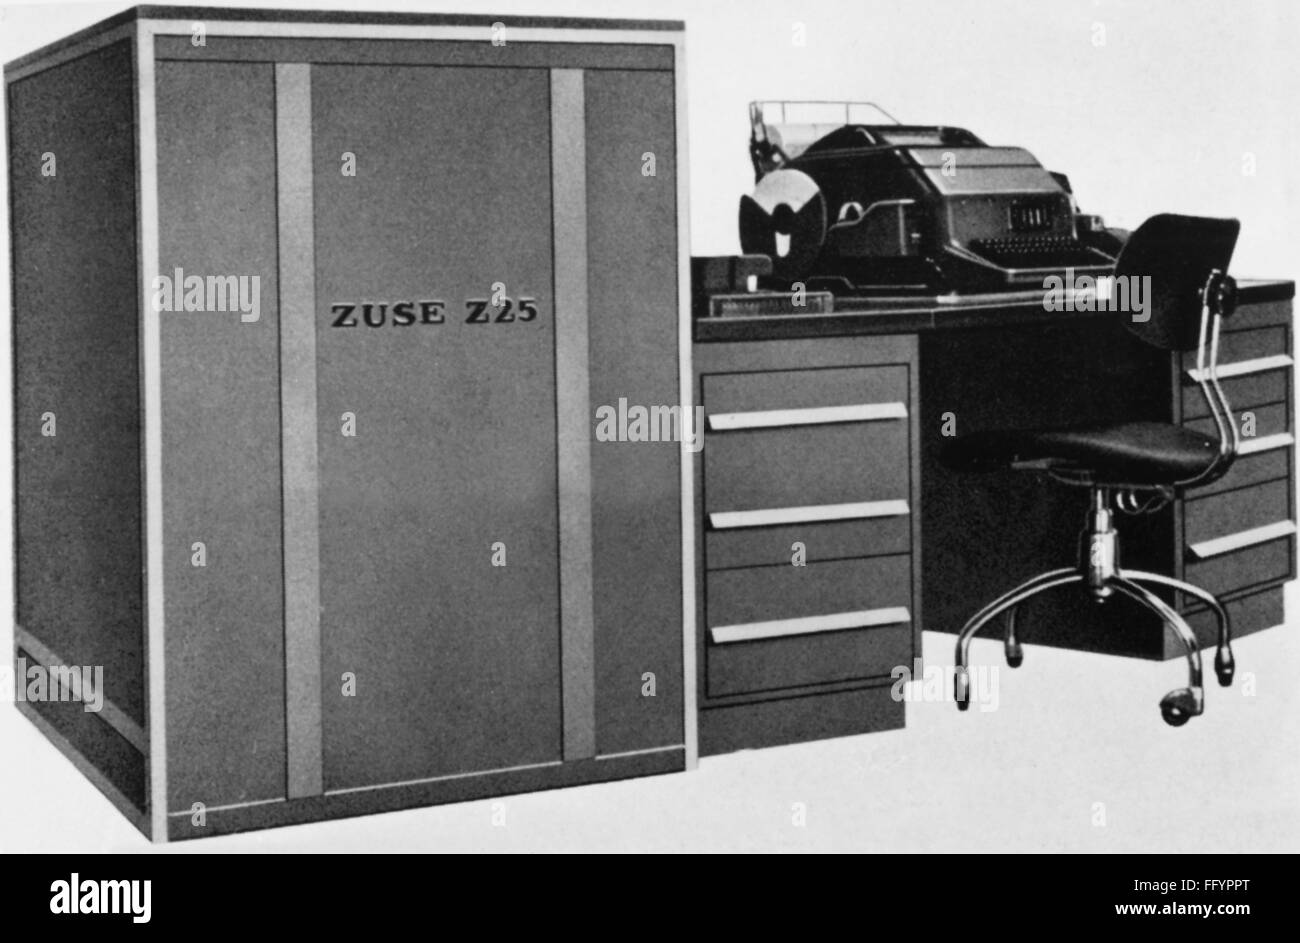 technics,computer,microcomputer Z25,extensible in modular system,1963,20th century,1960s,Germany,Konrad Zuse,data processing unit,EDP,IT,writing table,writing tables,desk,desks,office chair,office chairs,chair,chairs,teletypewriter,teletypewriters,typewriter,typewriters,calculating machine,calculator,calculating machines,calculators,electronic data processing,information technology,Chief Information Officer,technics,technology,technologies,60s,microcomputer,small computer,microcomputers,small computers,small business compu,Additional-Rights-Clearences-Not Available Stock Photo